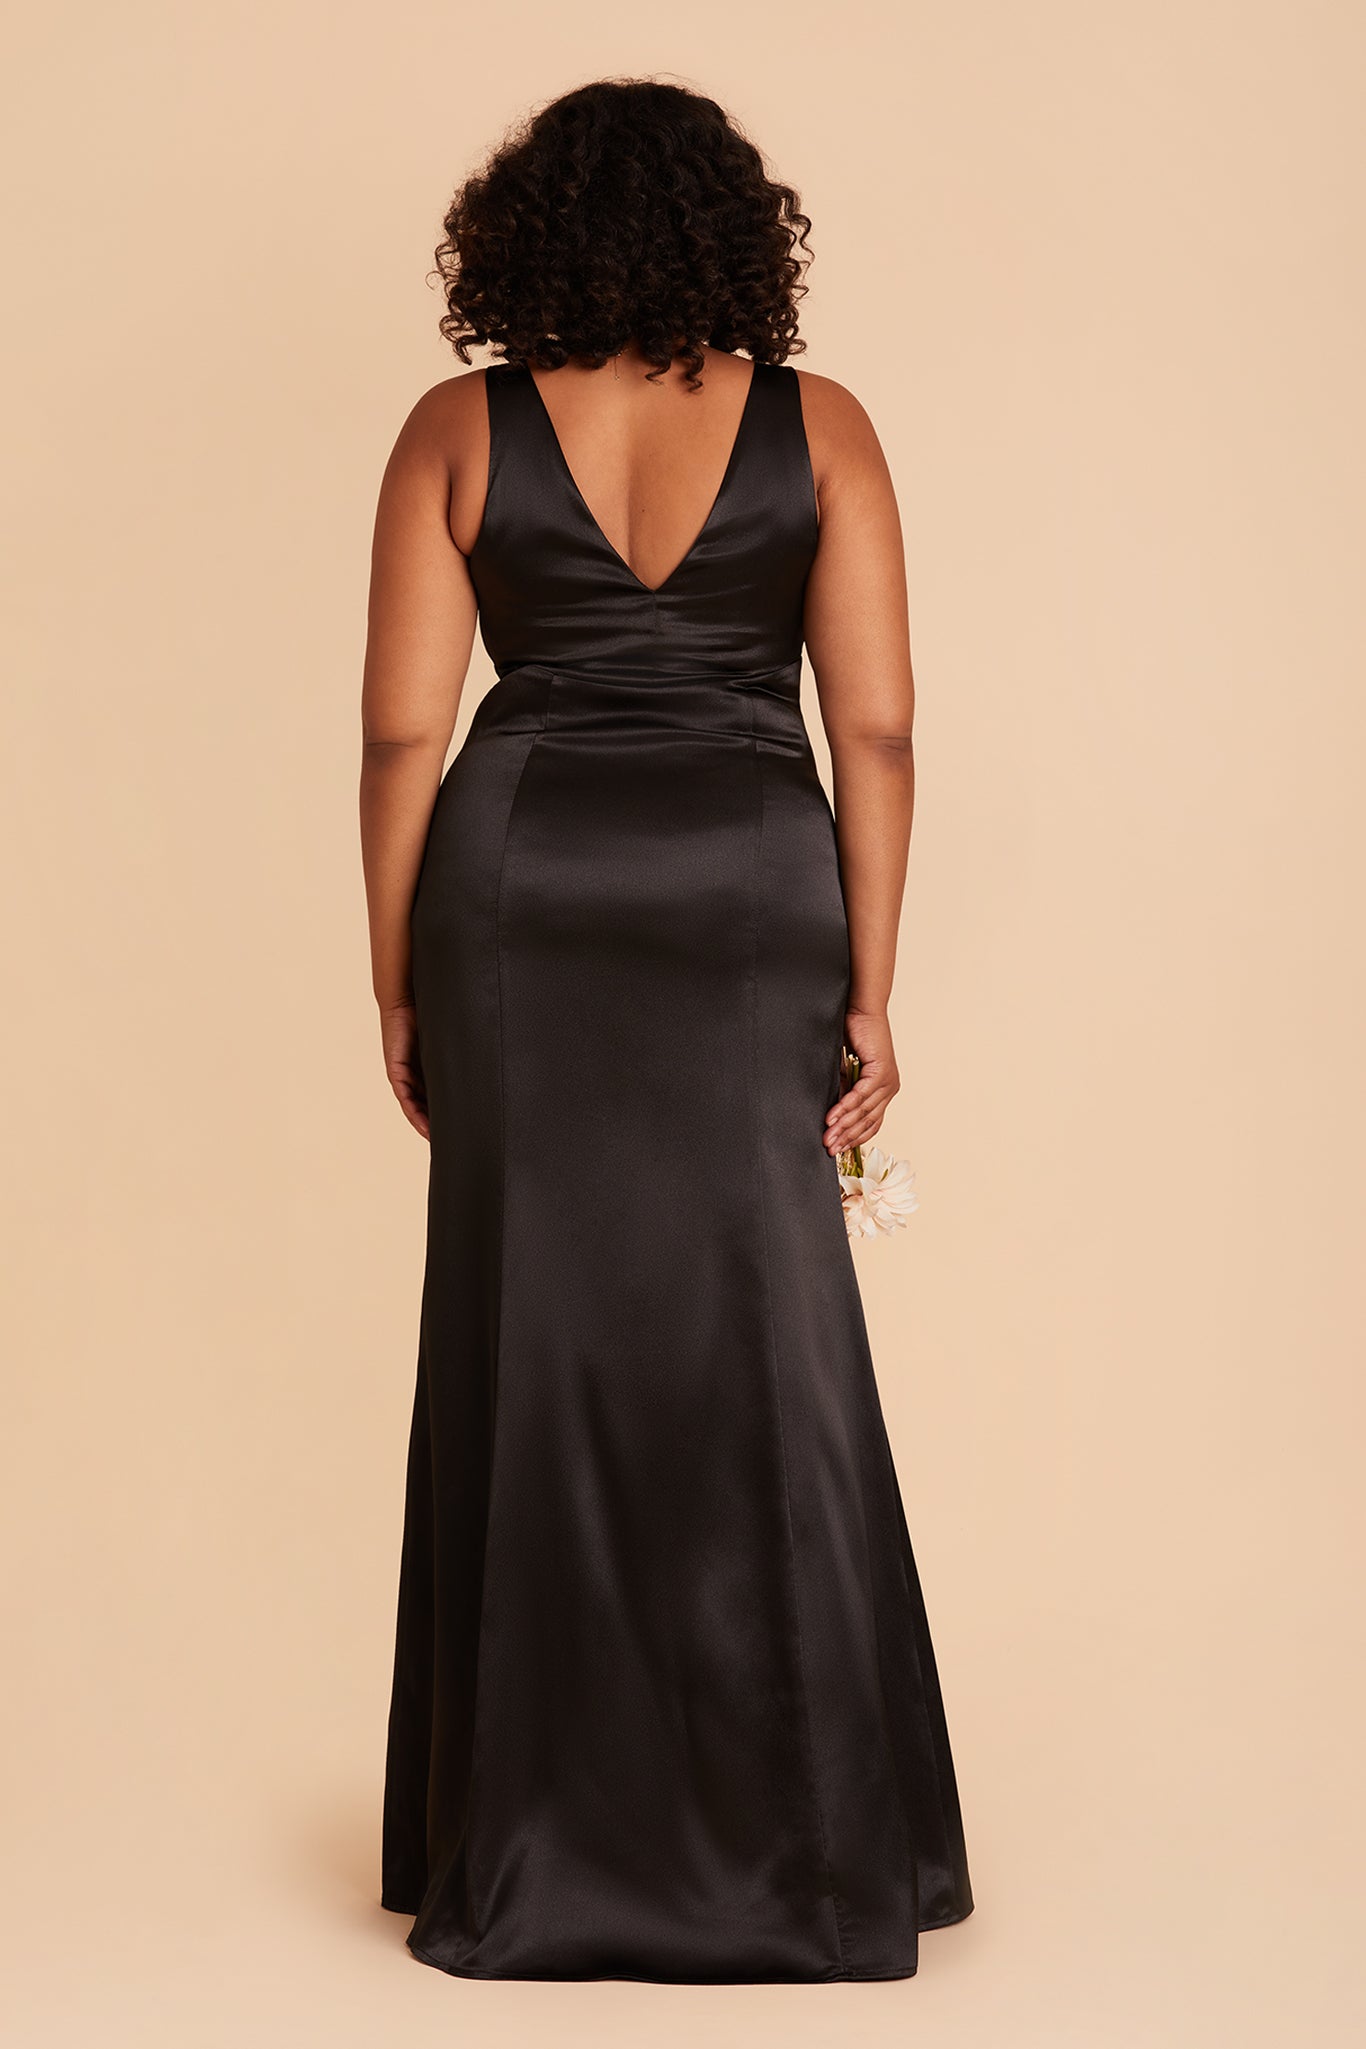 Gloria plus size bridesmaid dress with slit in black satin by Birdy Grey, back view